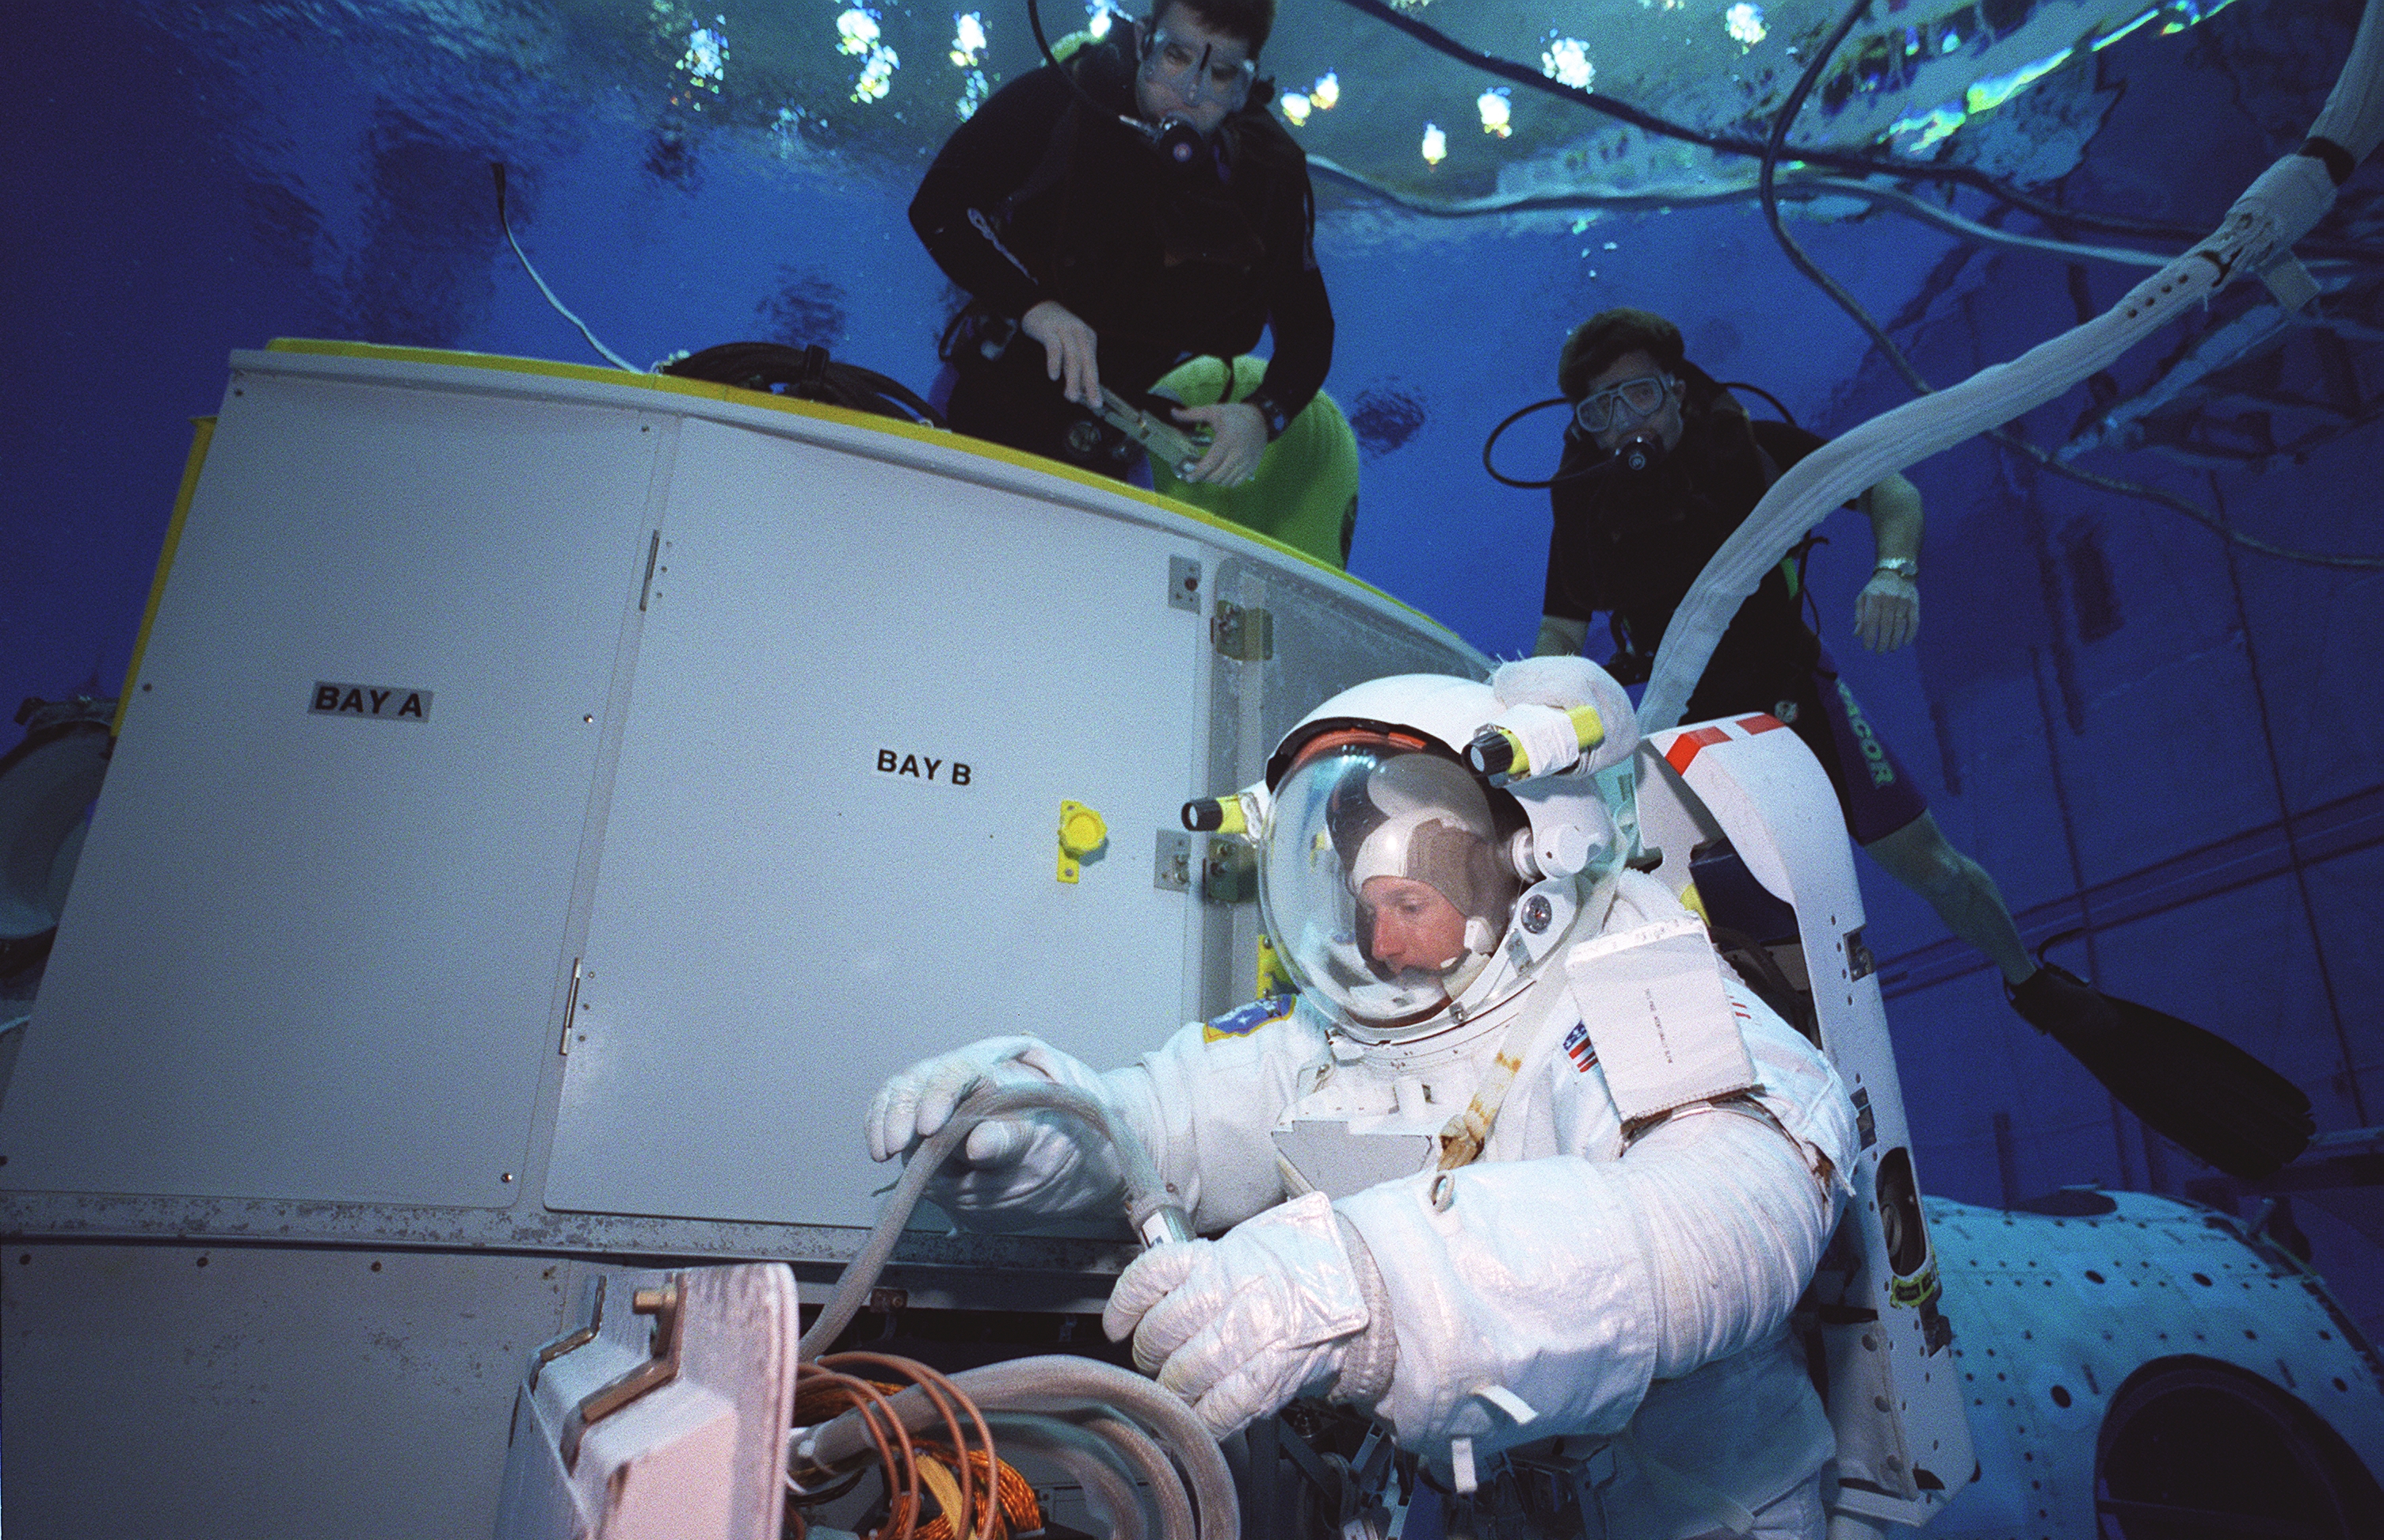 Clad in a spacesuit, an astroanut in an underwater tank pulls a tube from a replica of Hubble's bay doors. The labels "Bay A" and "Bay B" are visible on the doors. Two black-suited divers hover above him in the tank.